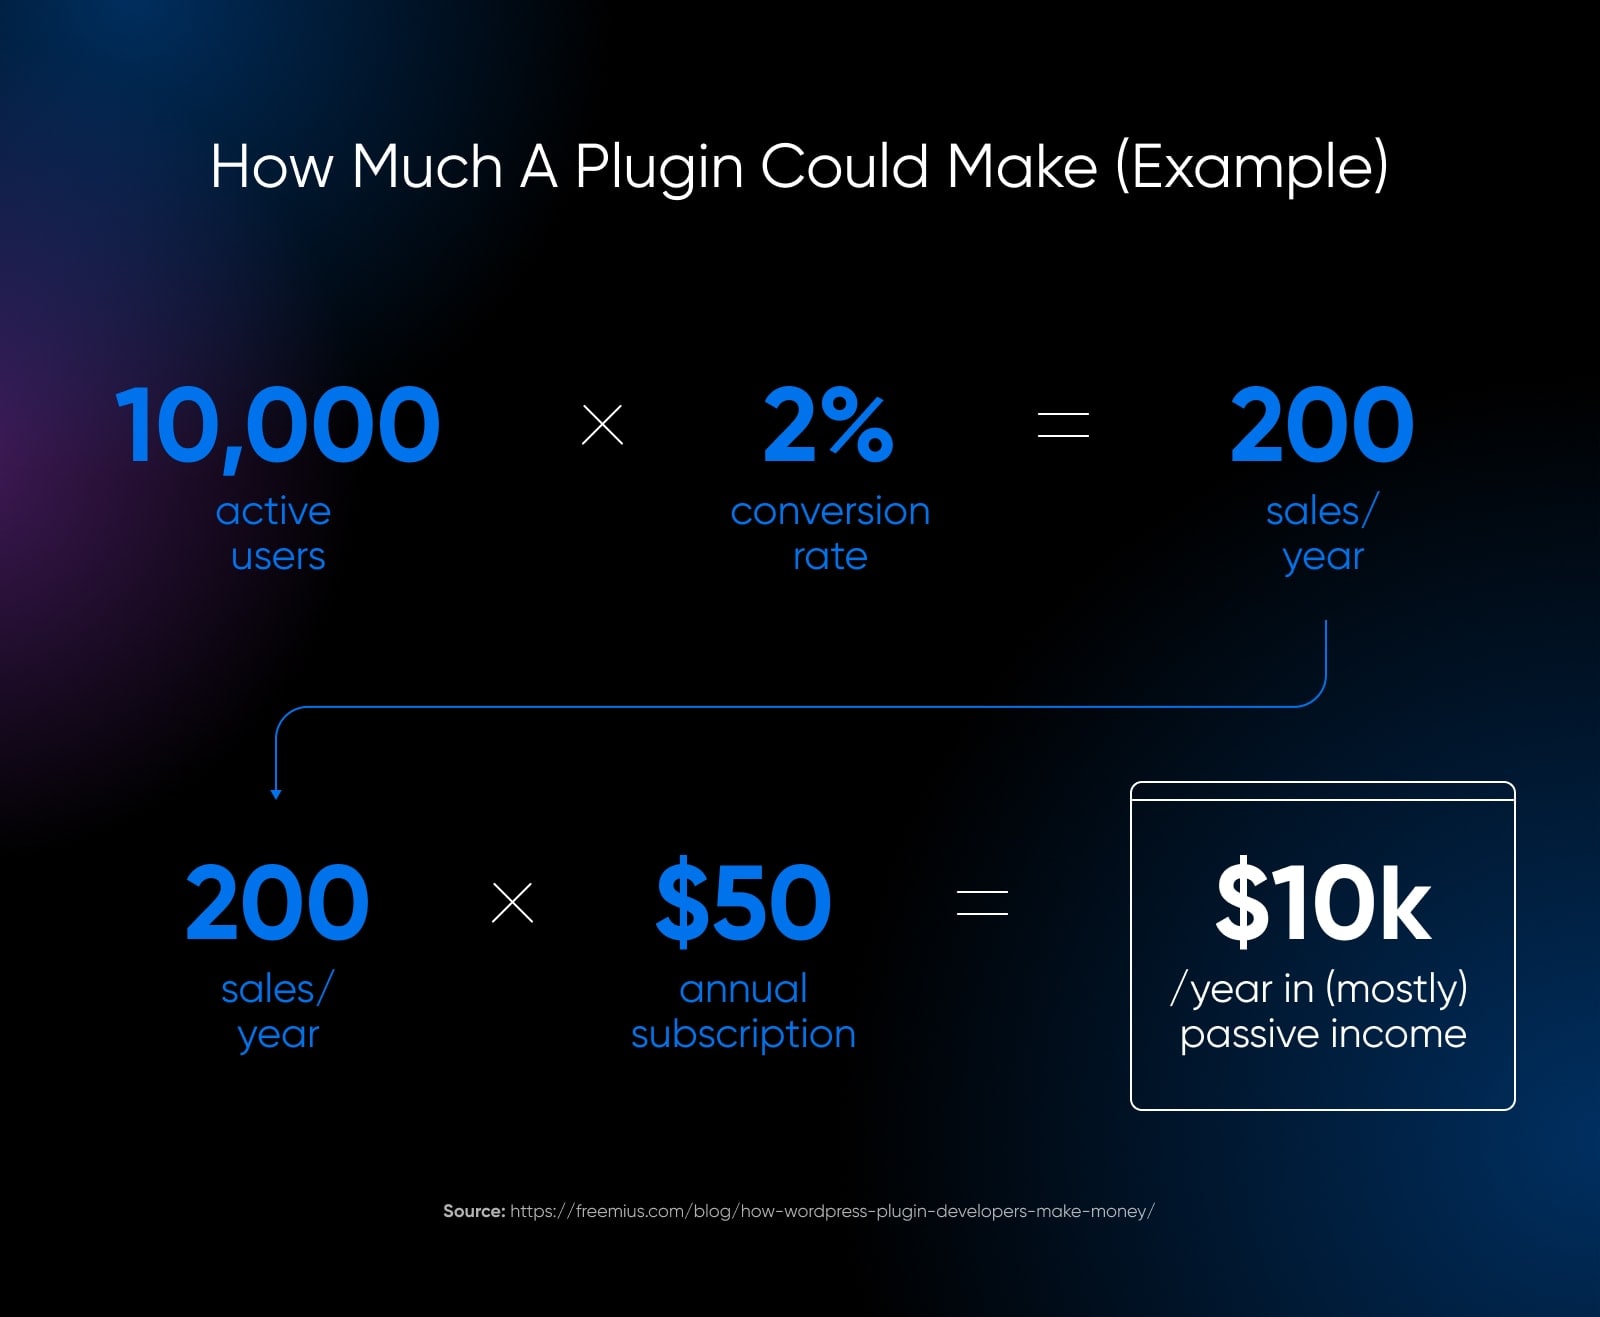 hypothetical math showing how much one could make by developing a plugin assuming 10,000 active users times 2% conversion equals 200 sales/year times $50/annual subscription equals $10K